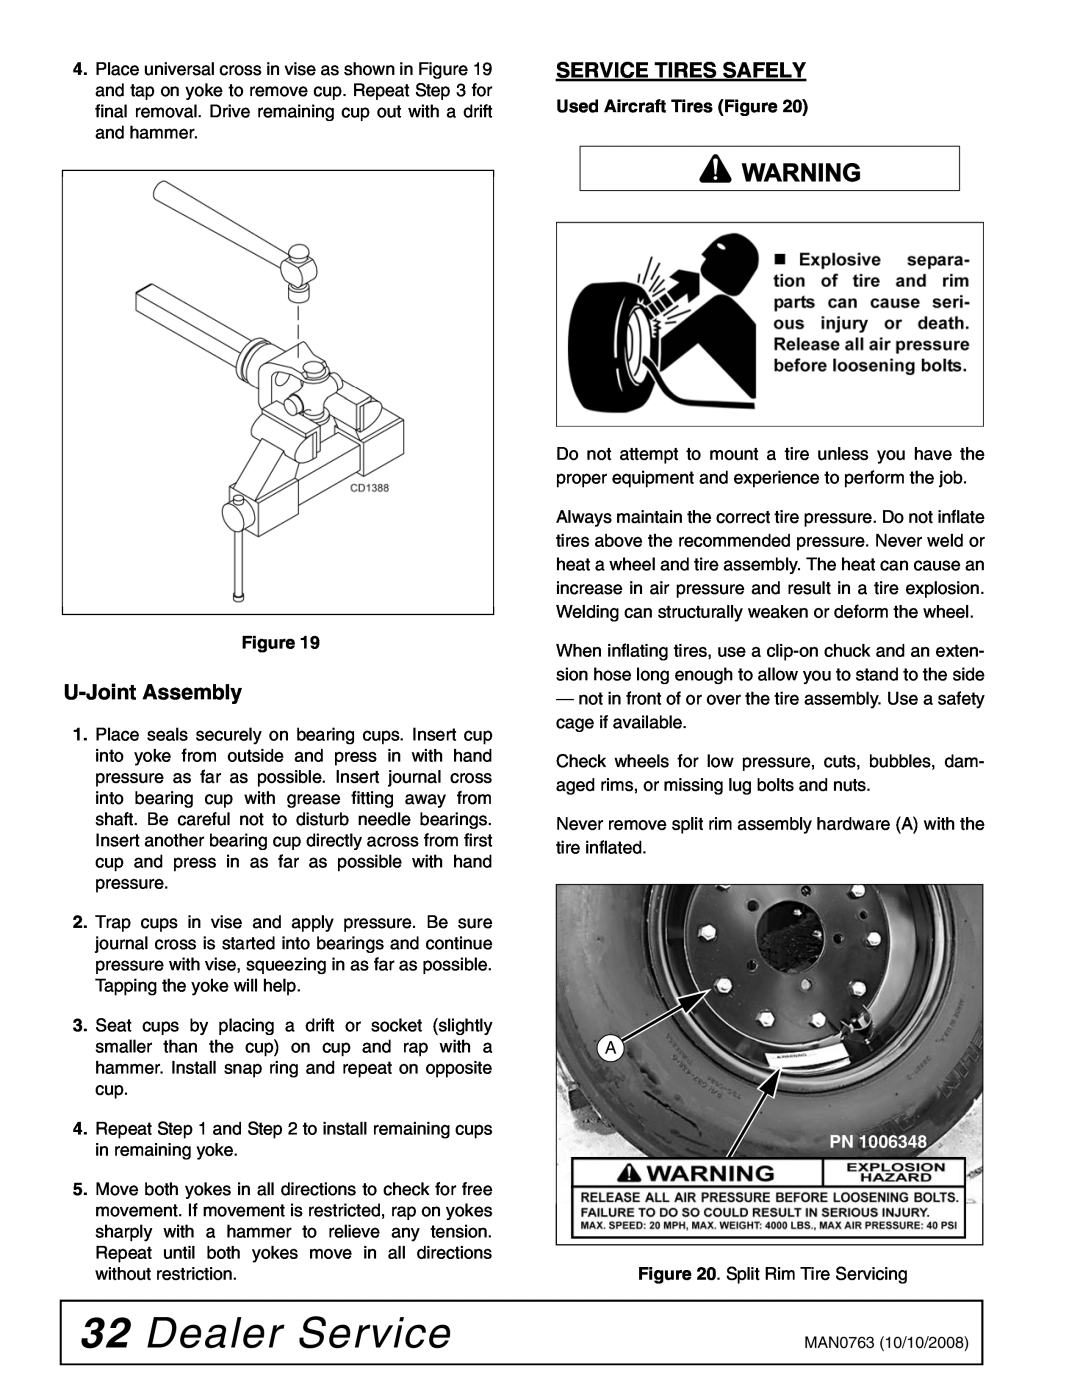 Woods Equipment BW240HDQ manual Dealer Service, U-Joint Assembly, Service Tires Safely 